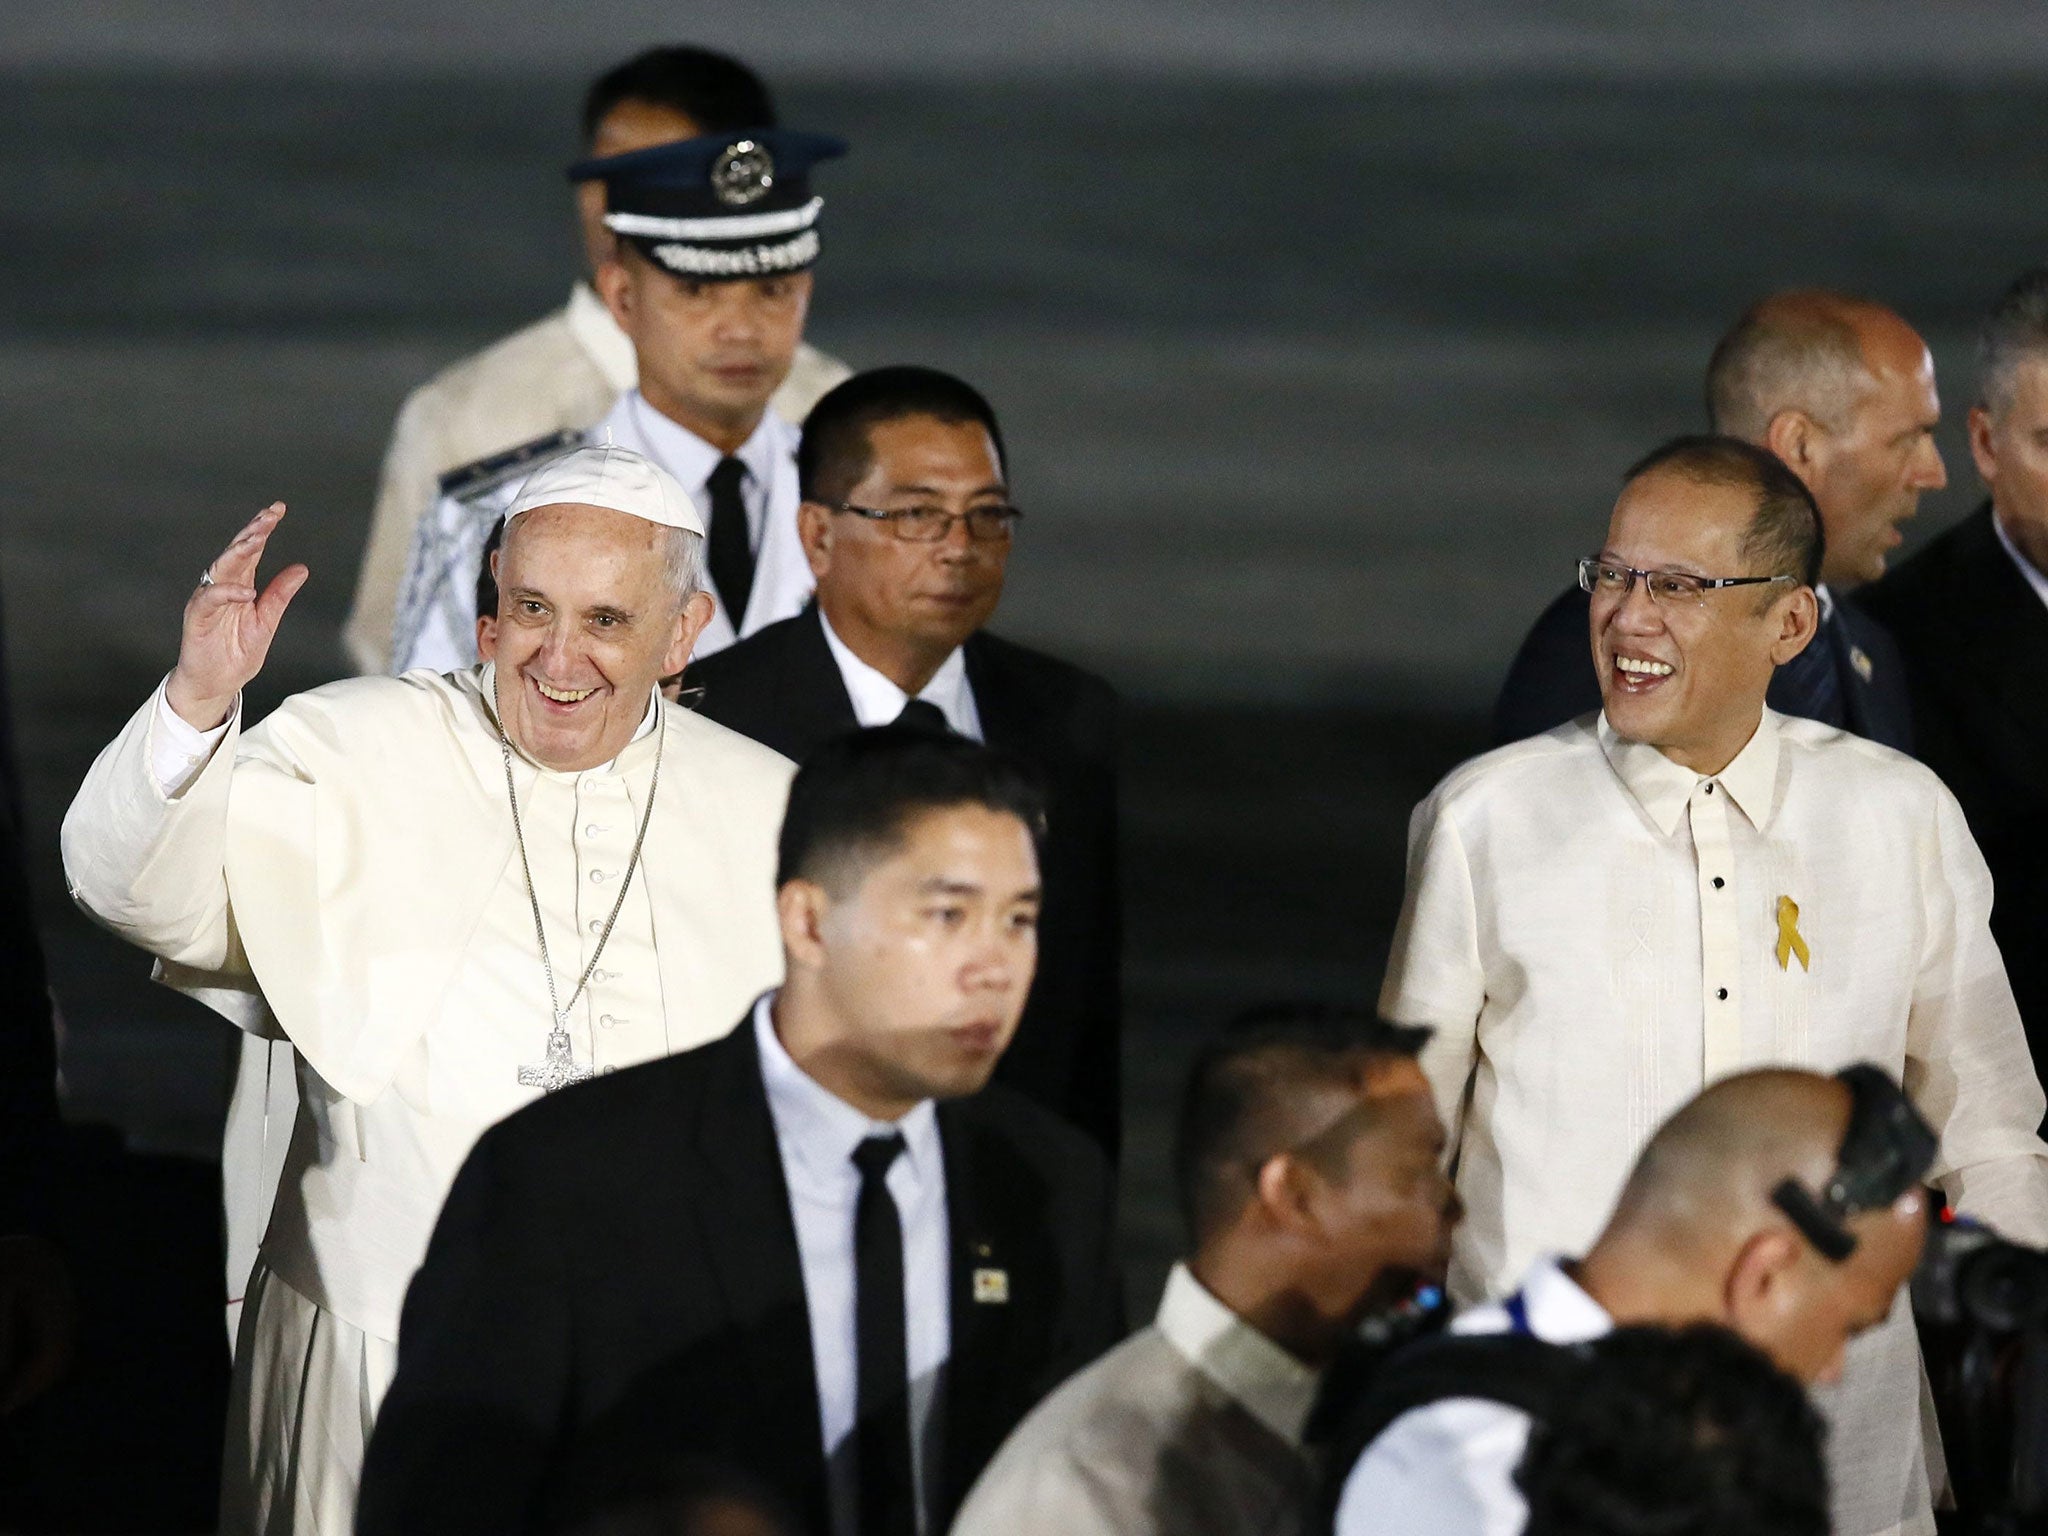 Pope Francis, new hat acquired, waves next to Philippine President Benigno Aquino III (R) during his arrival at the airport in Manila (EPA)